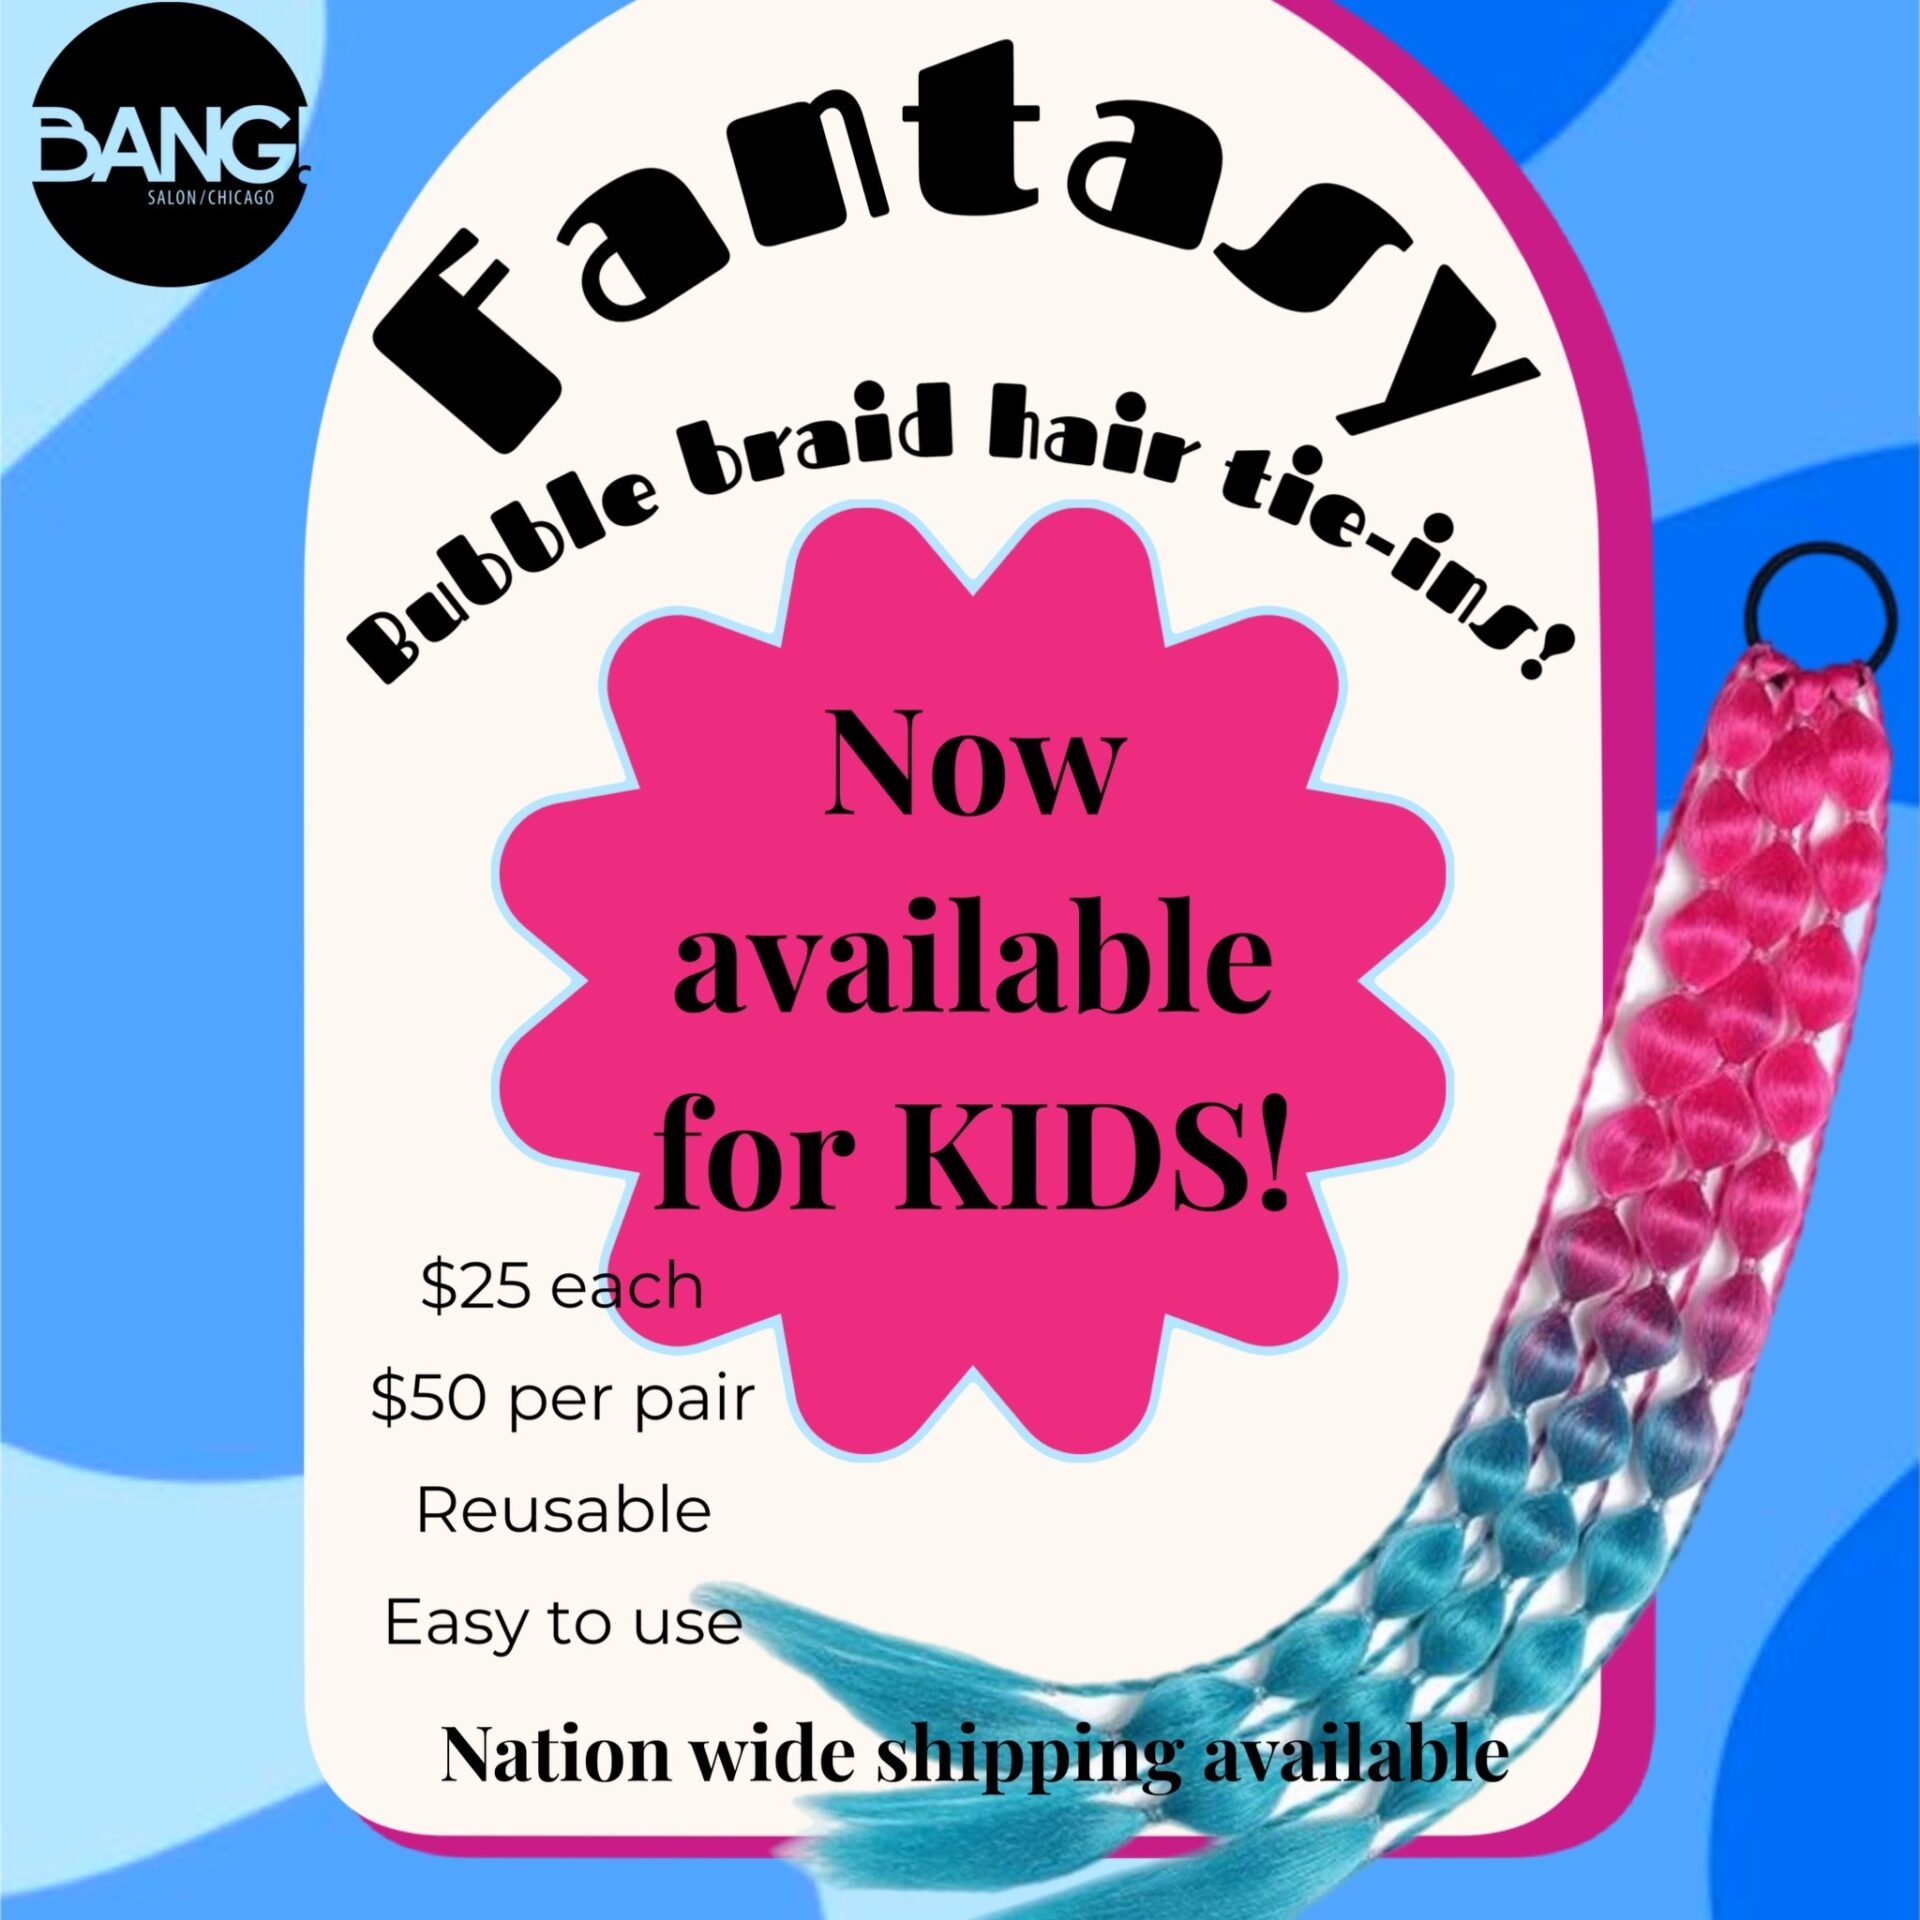 Bubble braid tie-ins for kids now available!